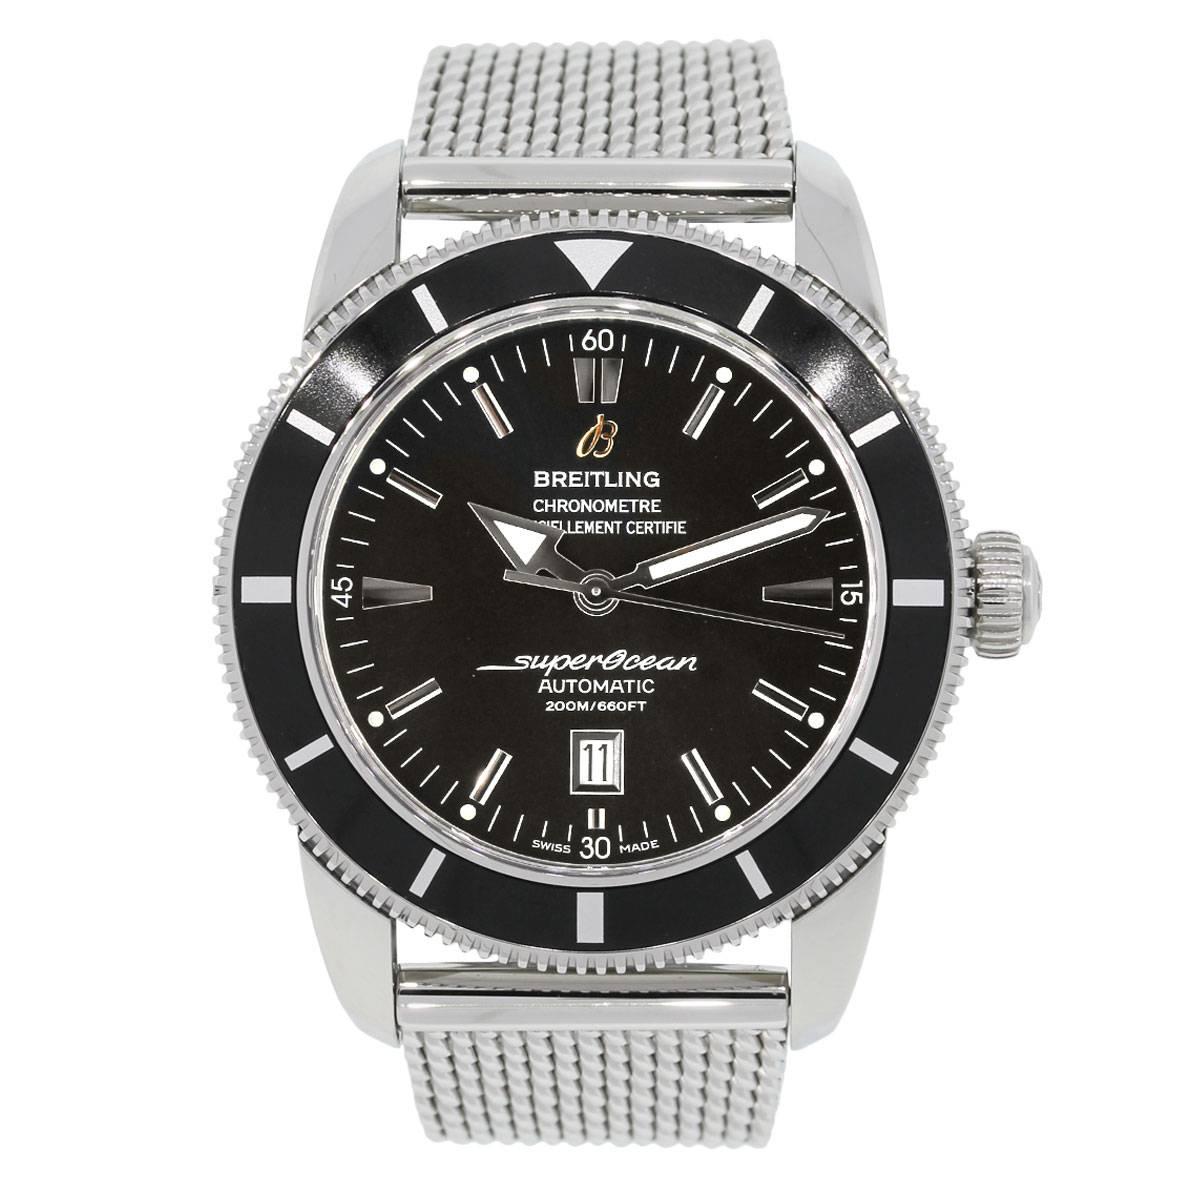 Brand: Breitling
MPN: A17320
Model: Superocean
Case Material: Stainless steel
Crystal: Sapphire
Case Diameter: 46mm
Bezel: Unidirectional black bezel
Dial: Black dial with silver hour markers and silver hands. Date window at the 6 o'clock